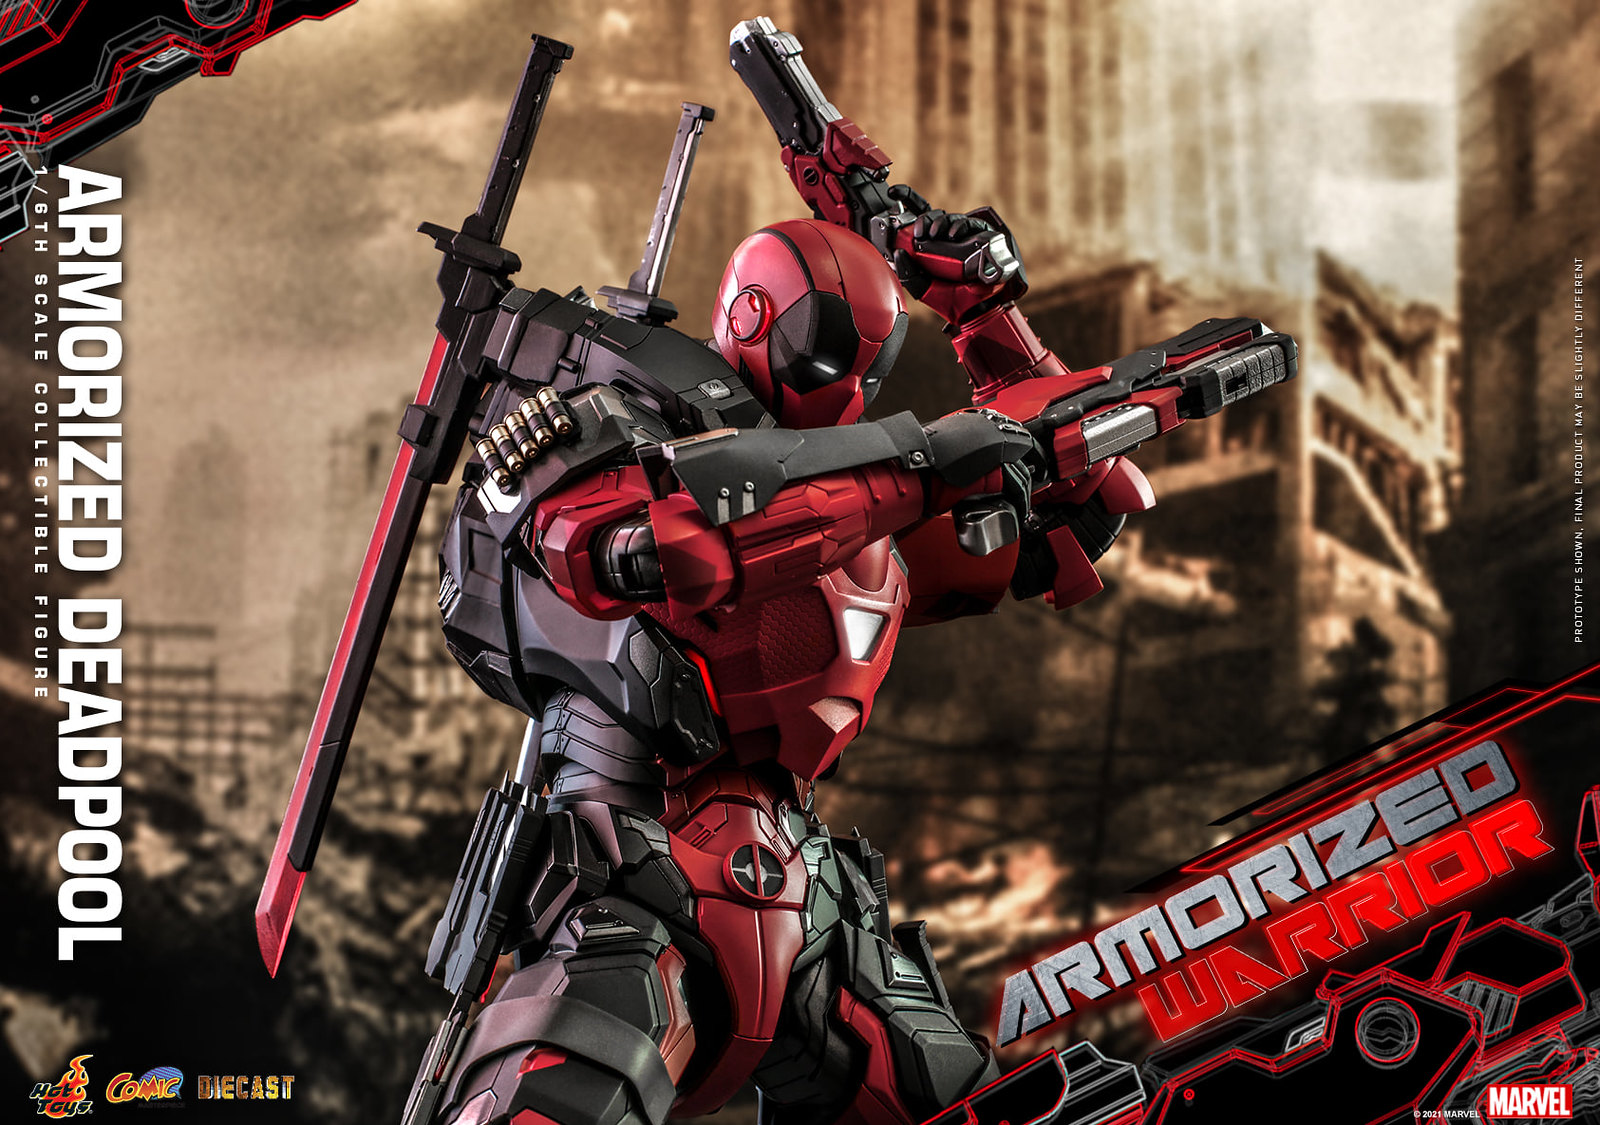 NEW PRODUCT: Hot Toys Armorized Warrior - 1/6th scale Armorized Deadpool Collectible Figure [Armorized Warrior Collection] 51311442818_755ef8b2f8_h